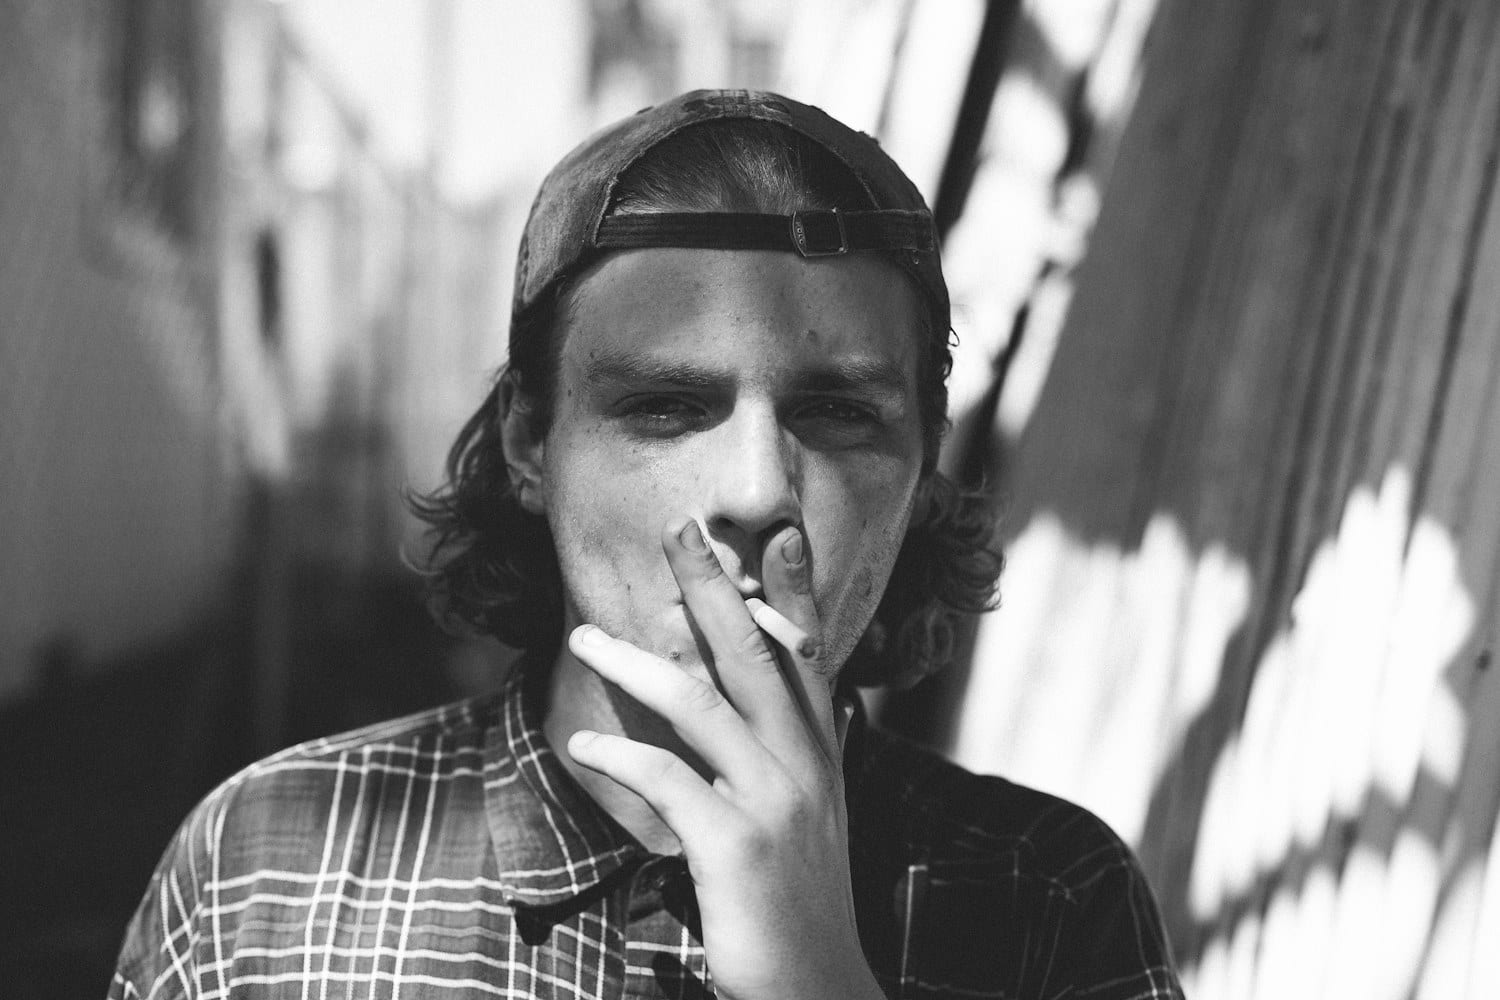 Track Review: Another One // Mac Demarco